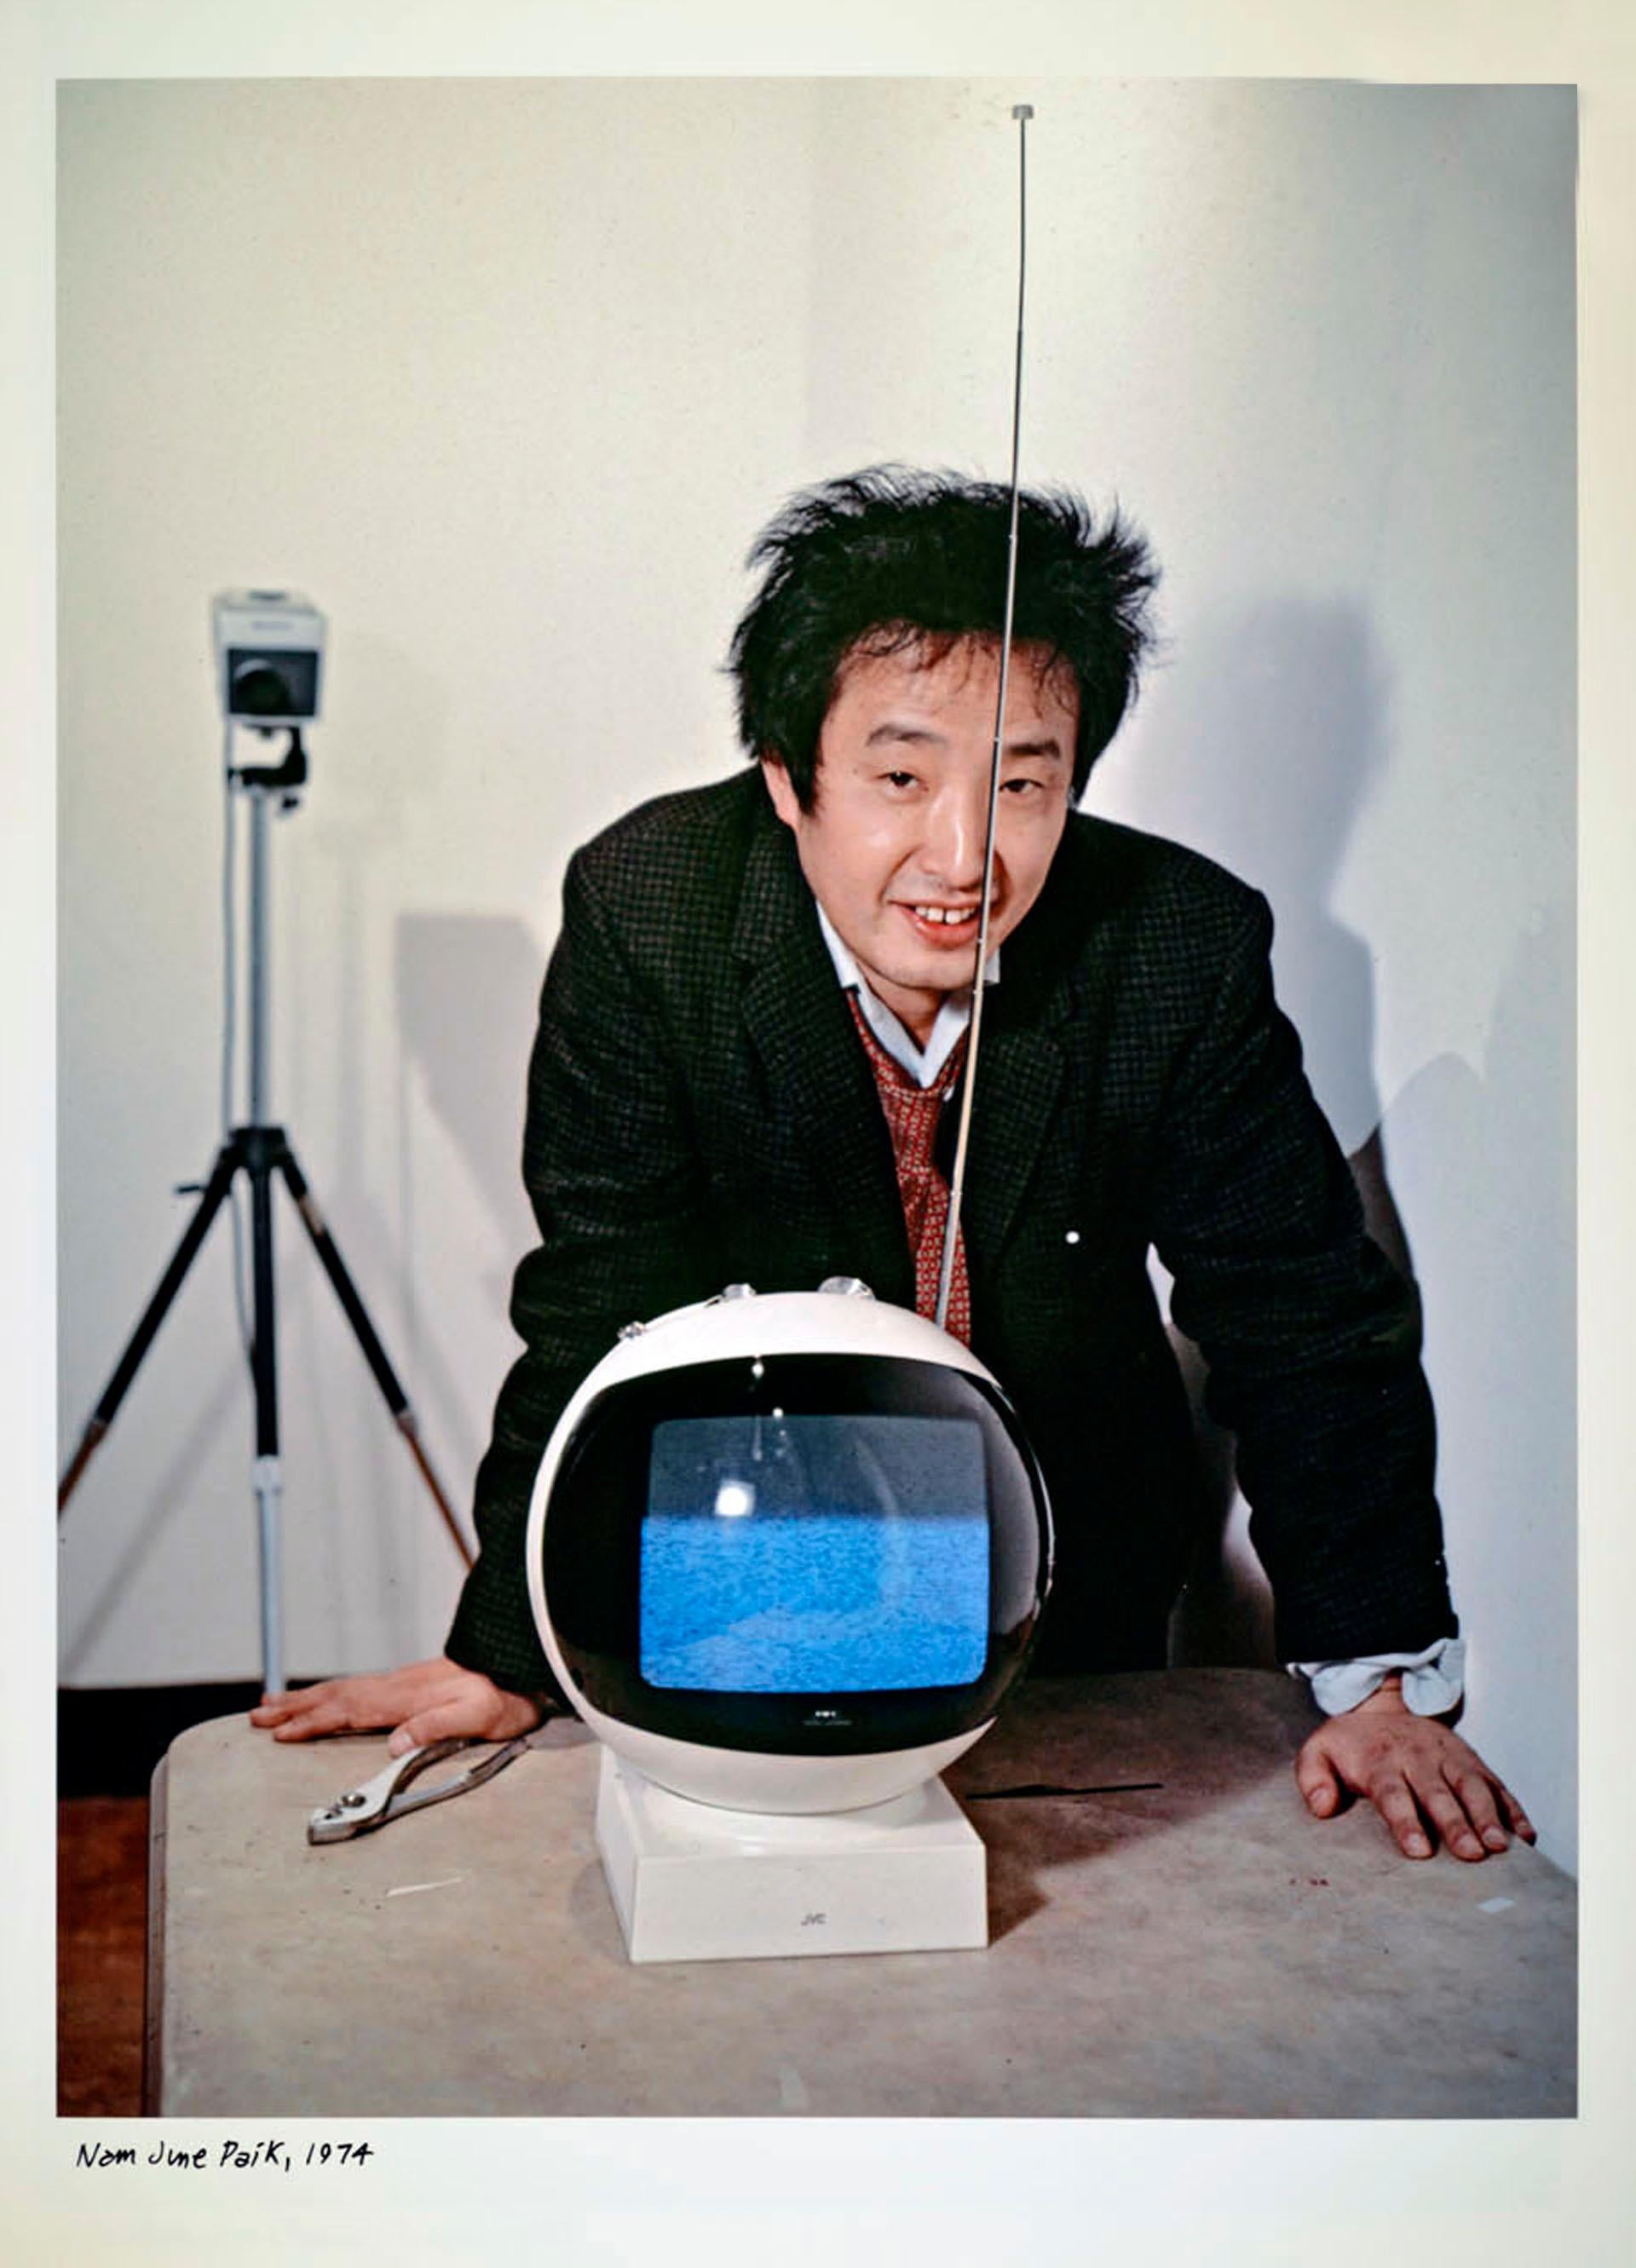  Video artist Nam June Paik photographed with his latest multimedia work.